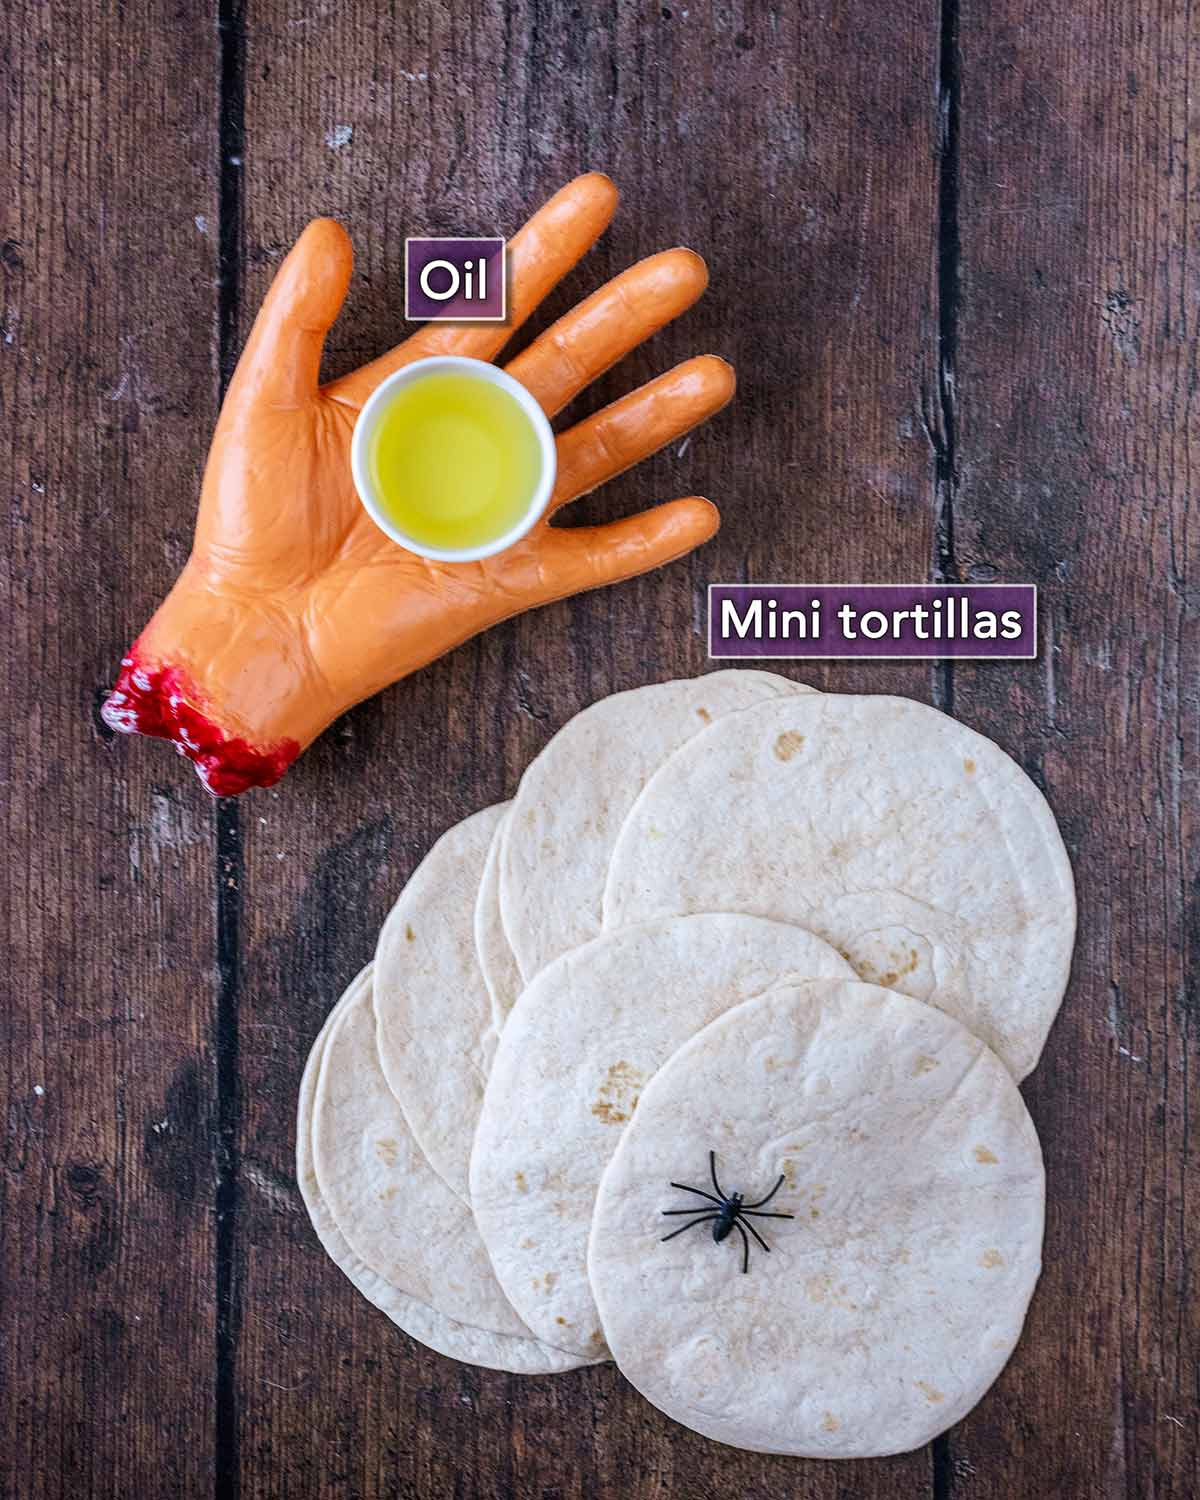 A fake severed hand holding a pot of oil and some flour tortillas with a fake spider.